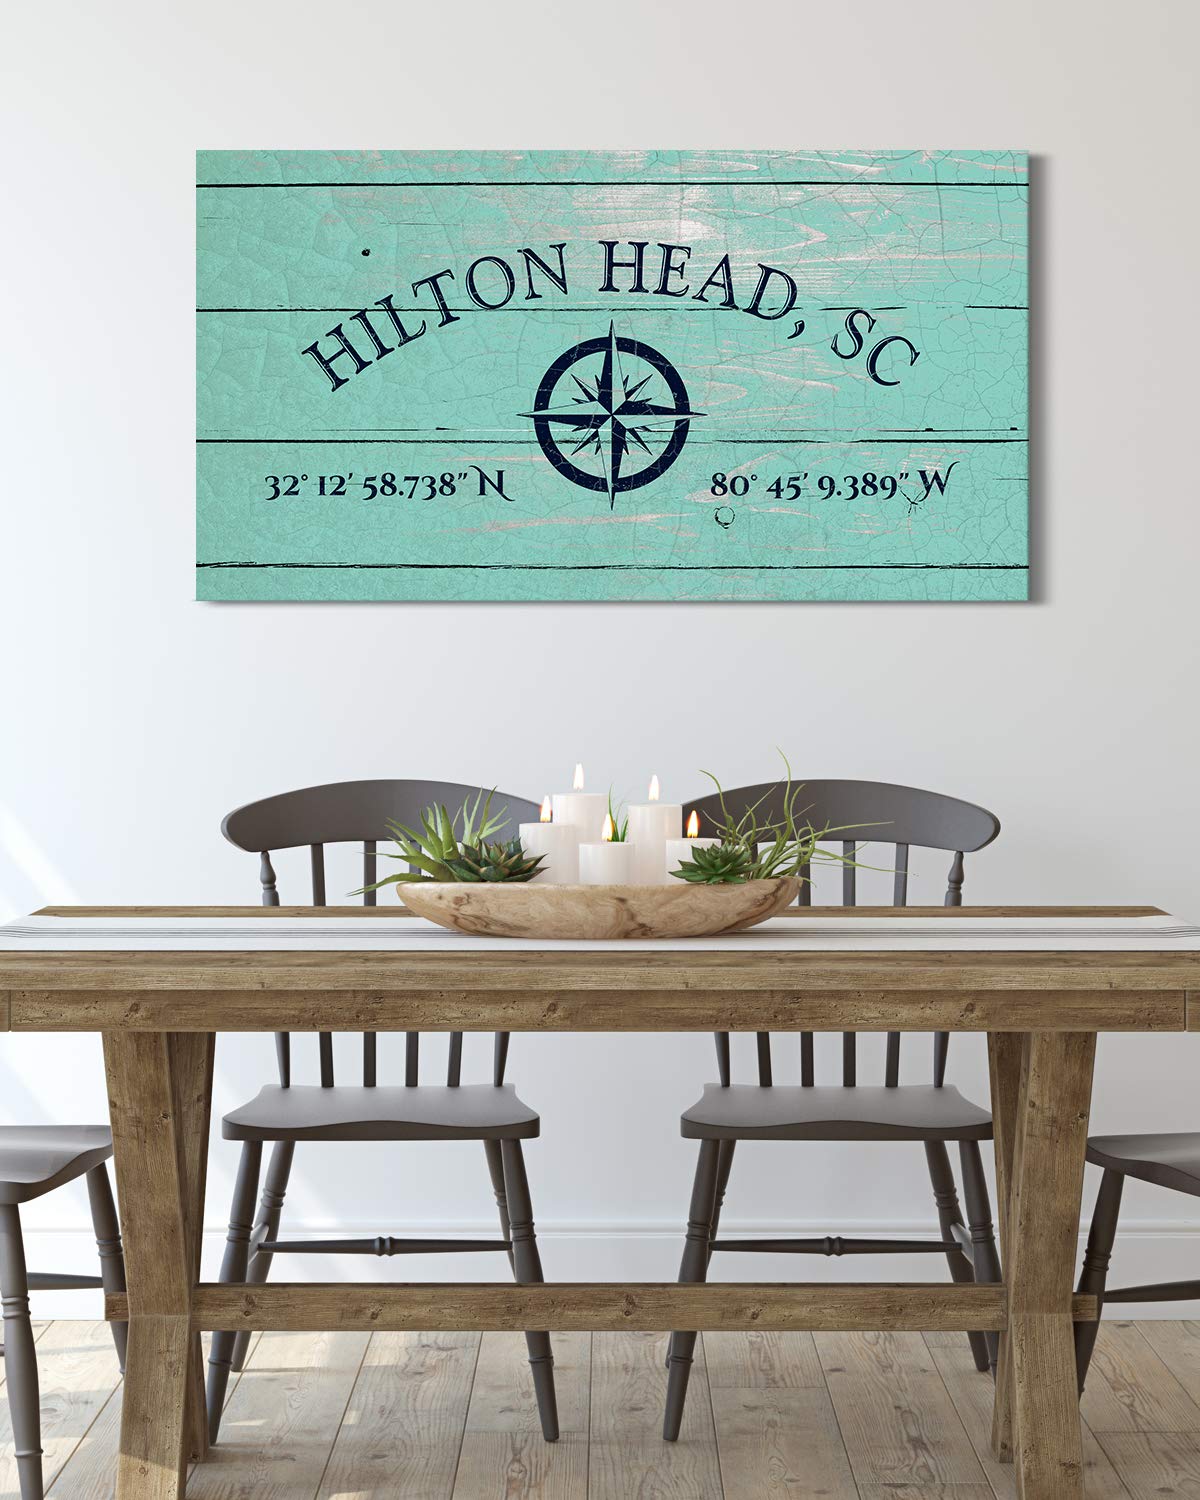 Hilton Head, SC 32° 12' 58.738" N, 80° 45' 9.389" W - Wall Decor Art Canvas with a distressed light turquoise woodgrain background - Ready to Hang - Great for above a couch, table, bed or more